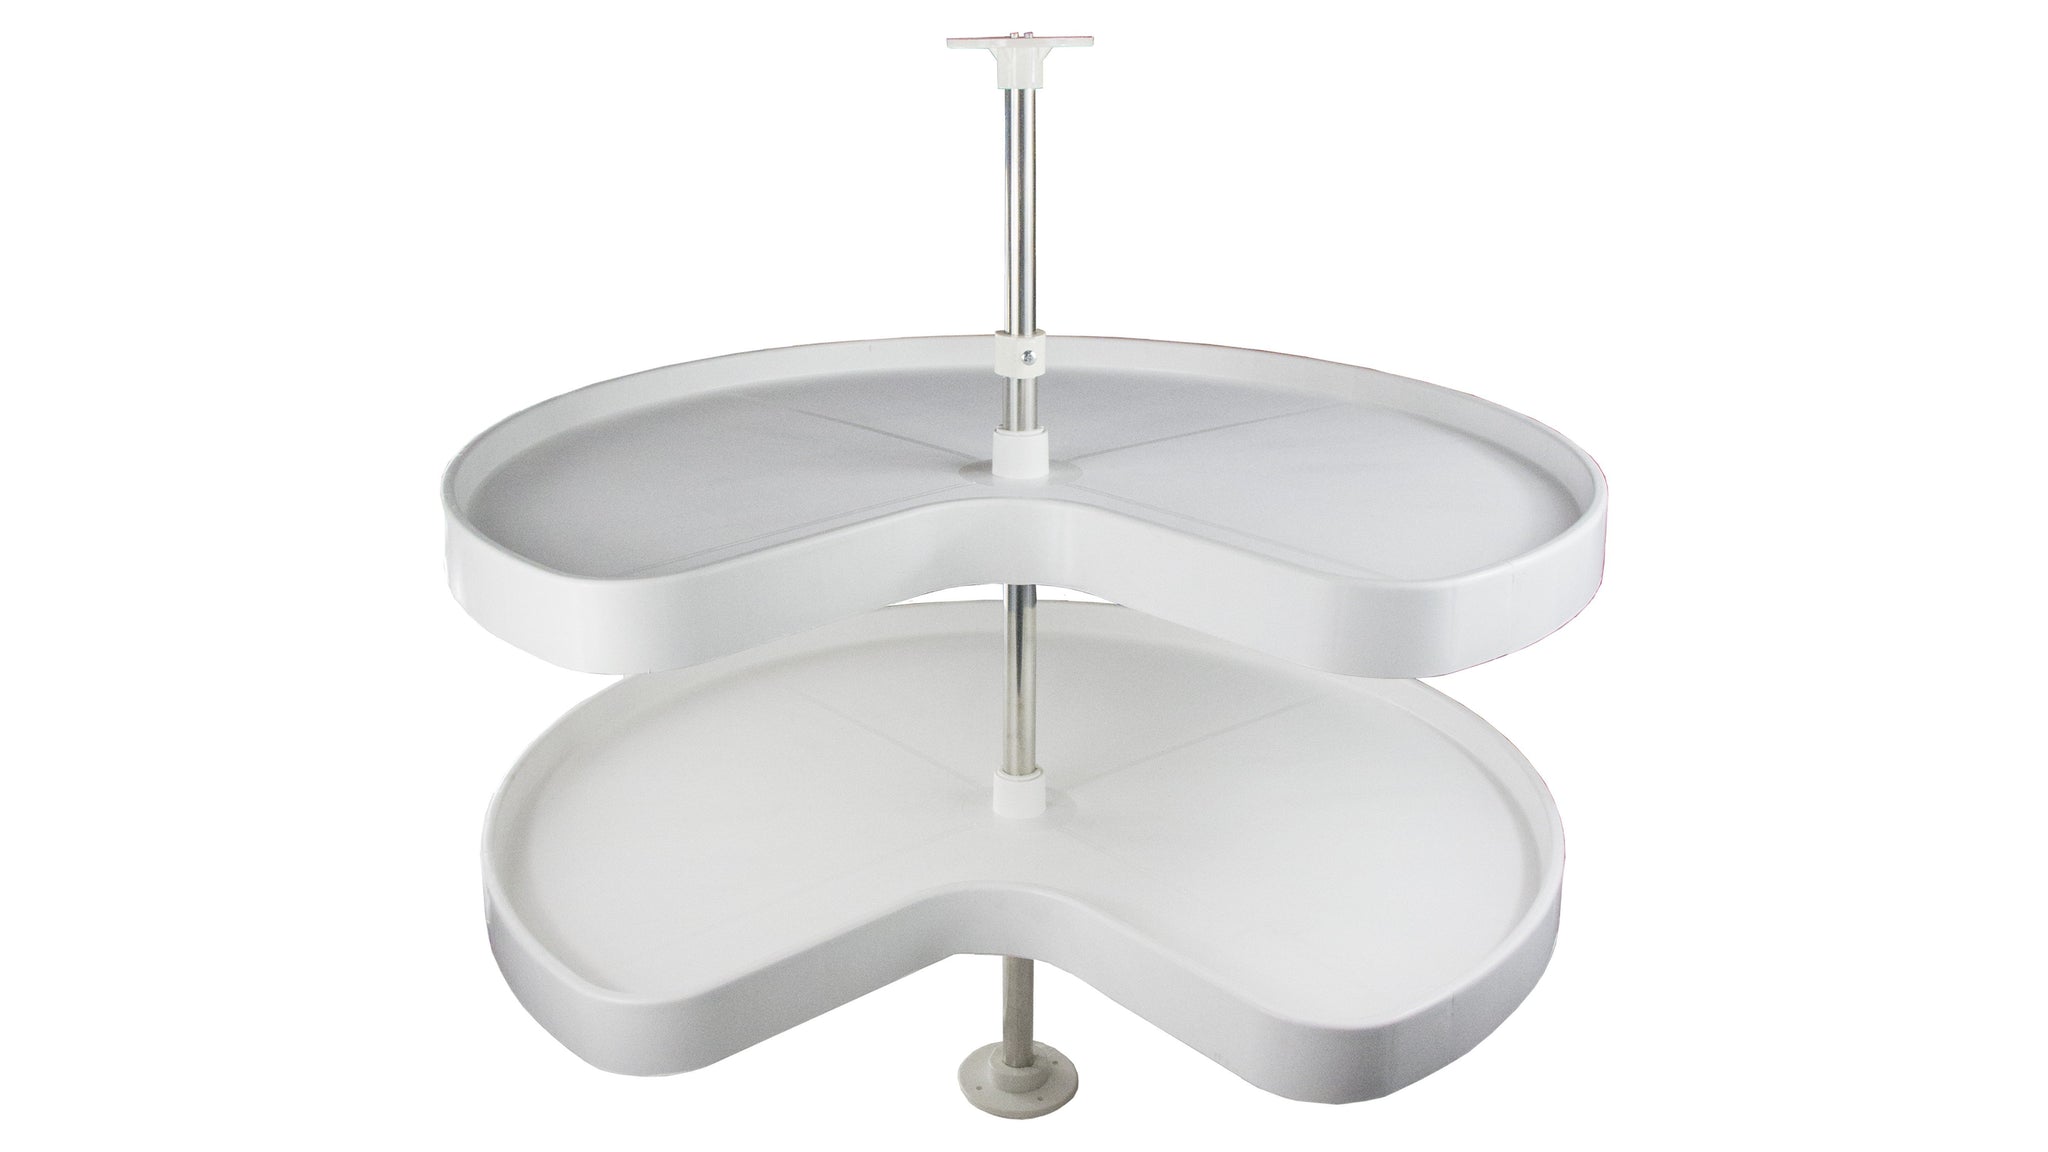 Two Tray Kidney Lazy Susan